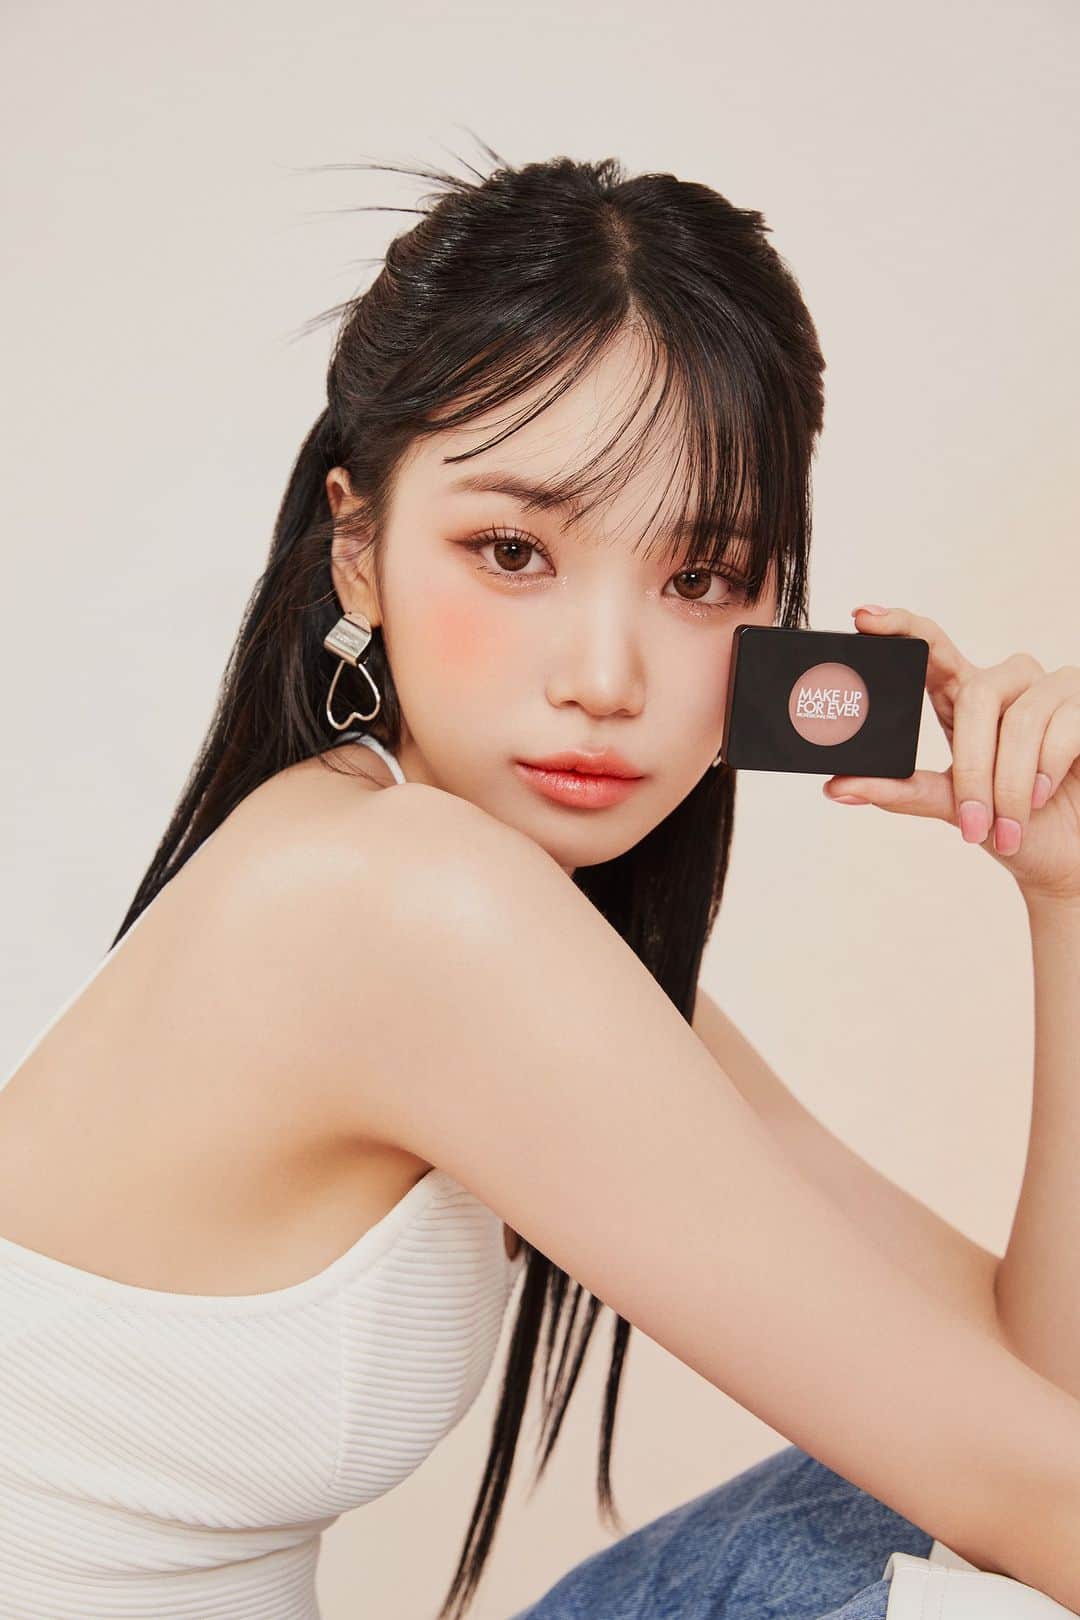 MAKE UP FOR EVER OFFICIALのインスタグラム：「REVEAL YOUR ARTISTRY   Our brand ambassador @_chaechae_1's fresh look was created using our new Artist Face Blush in the shade Iridescent Opal Pink.  #ArtistryIsCalling #MAKEUPFOREVER」